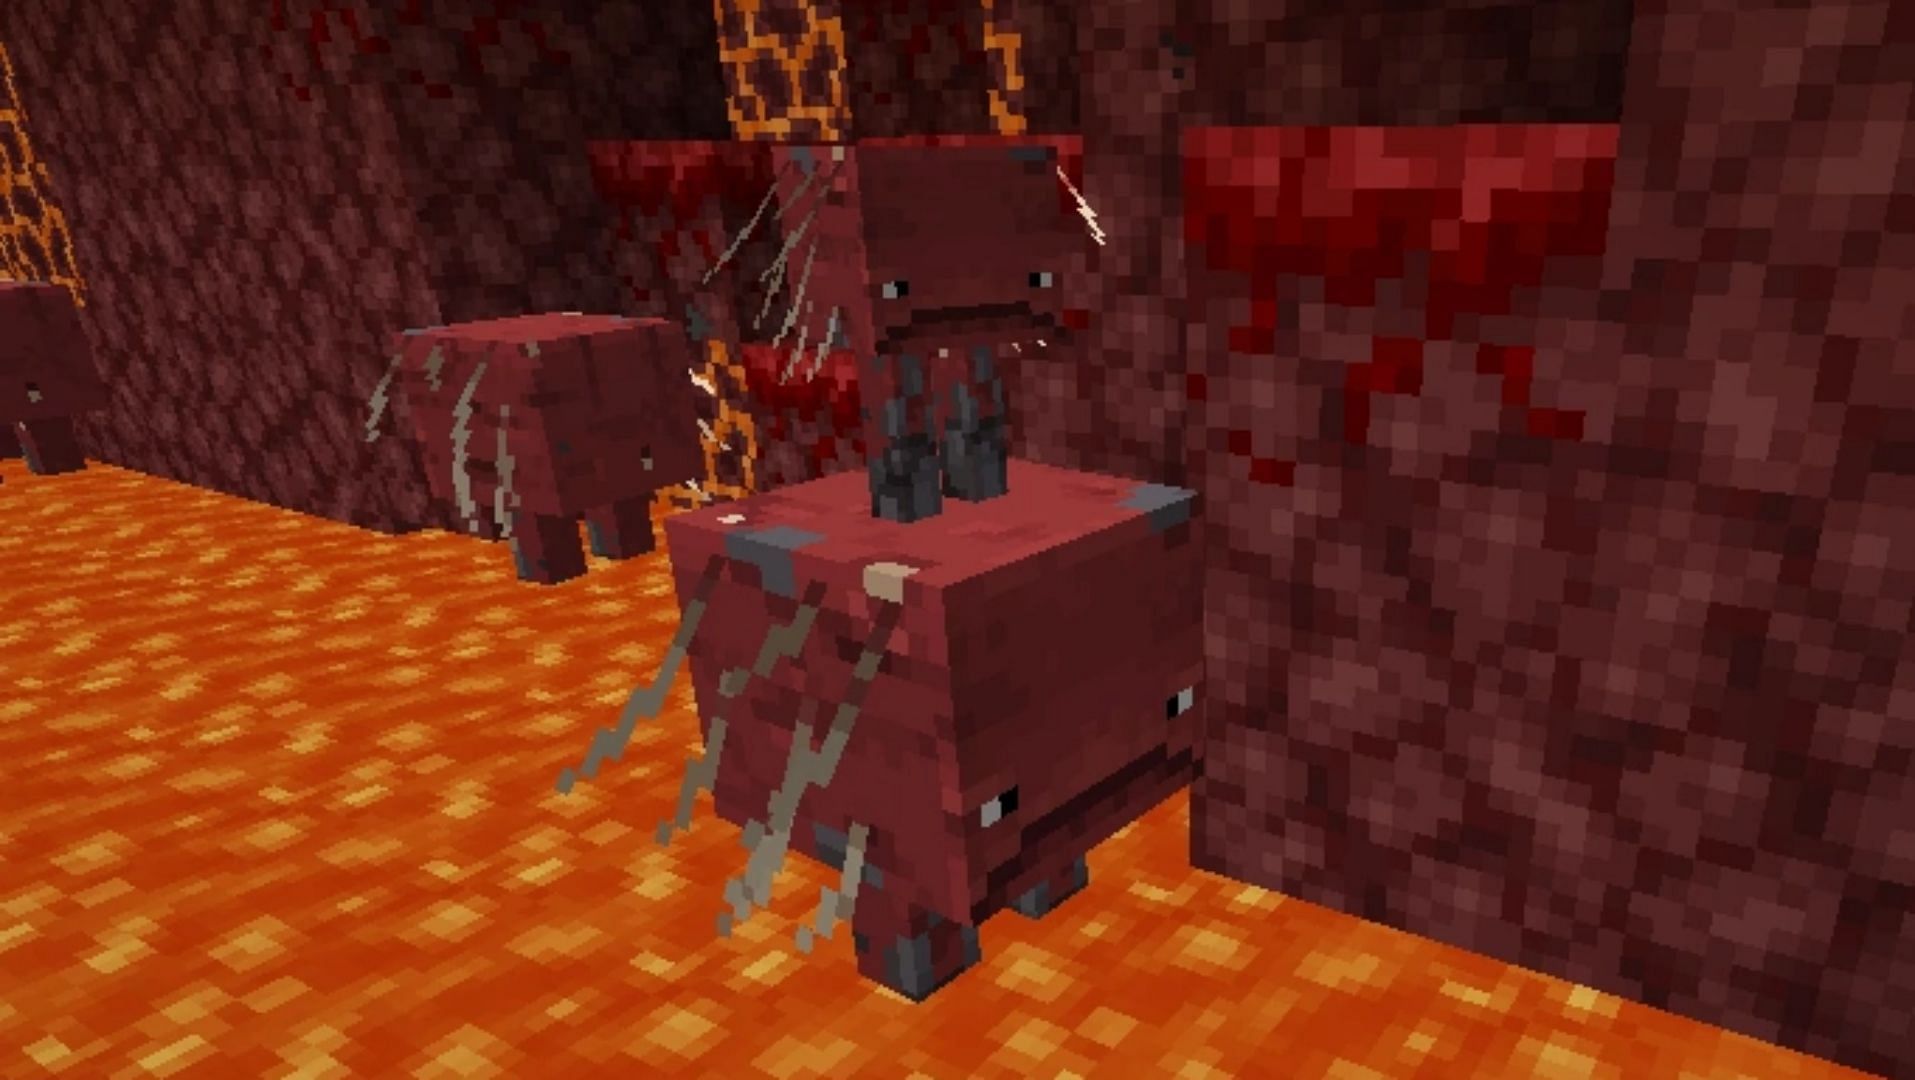 Striders in Minecraft are a decent mode of transportation in the Nether realm (Image via Mojang)